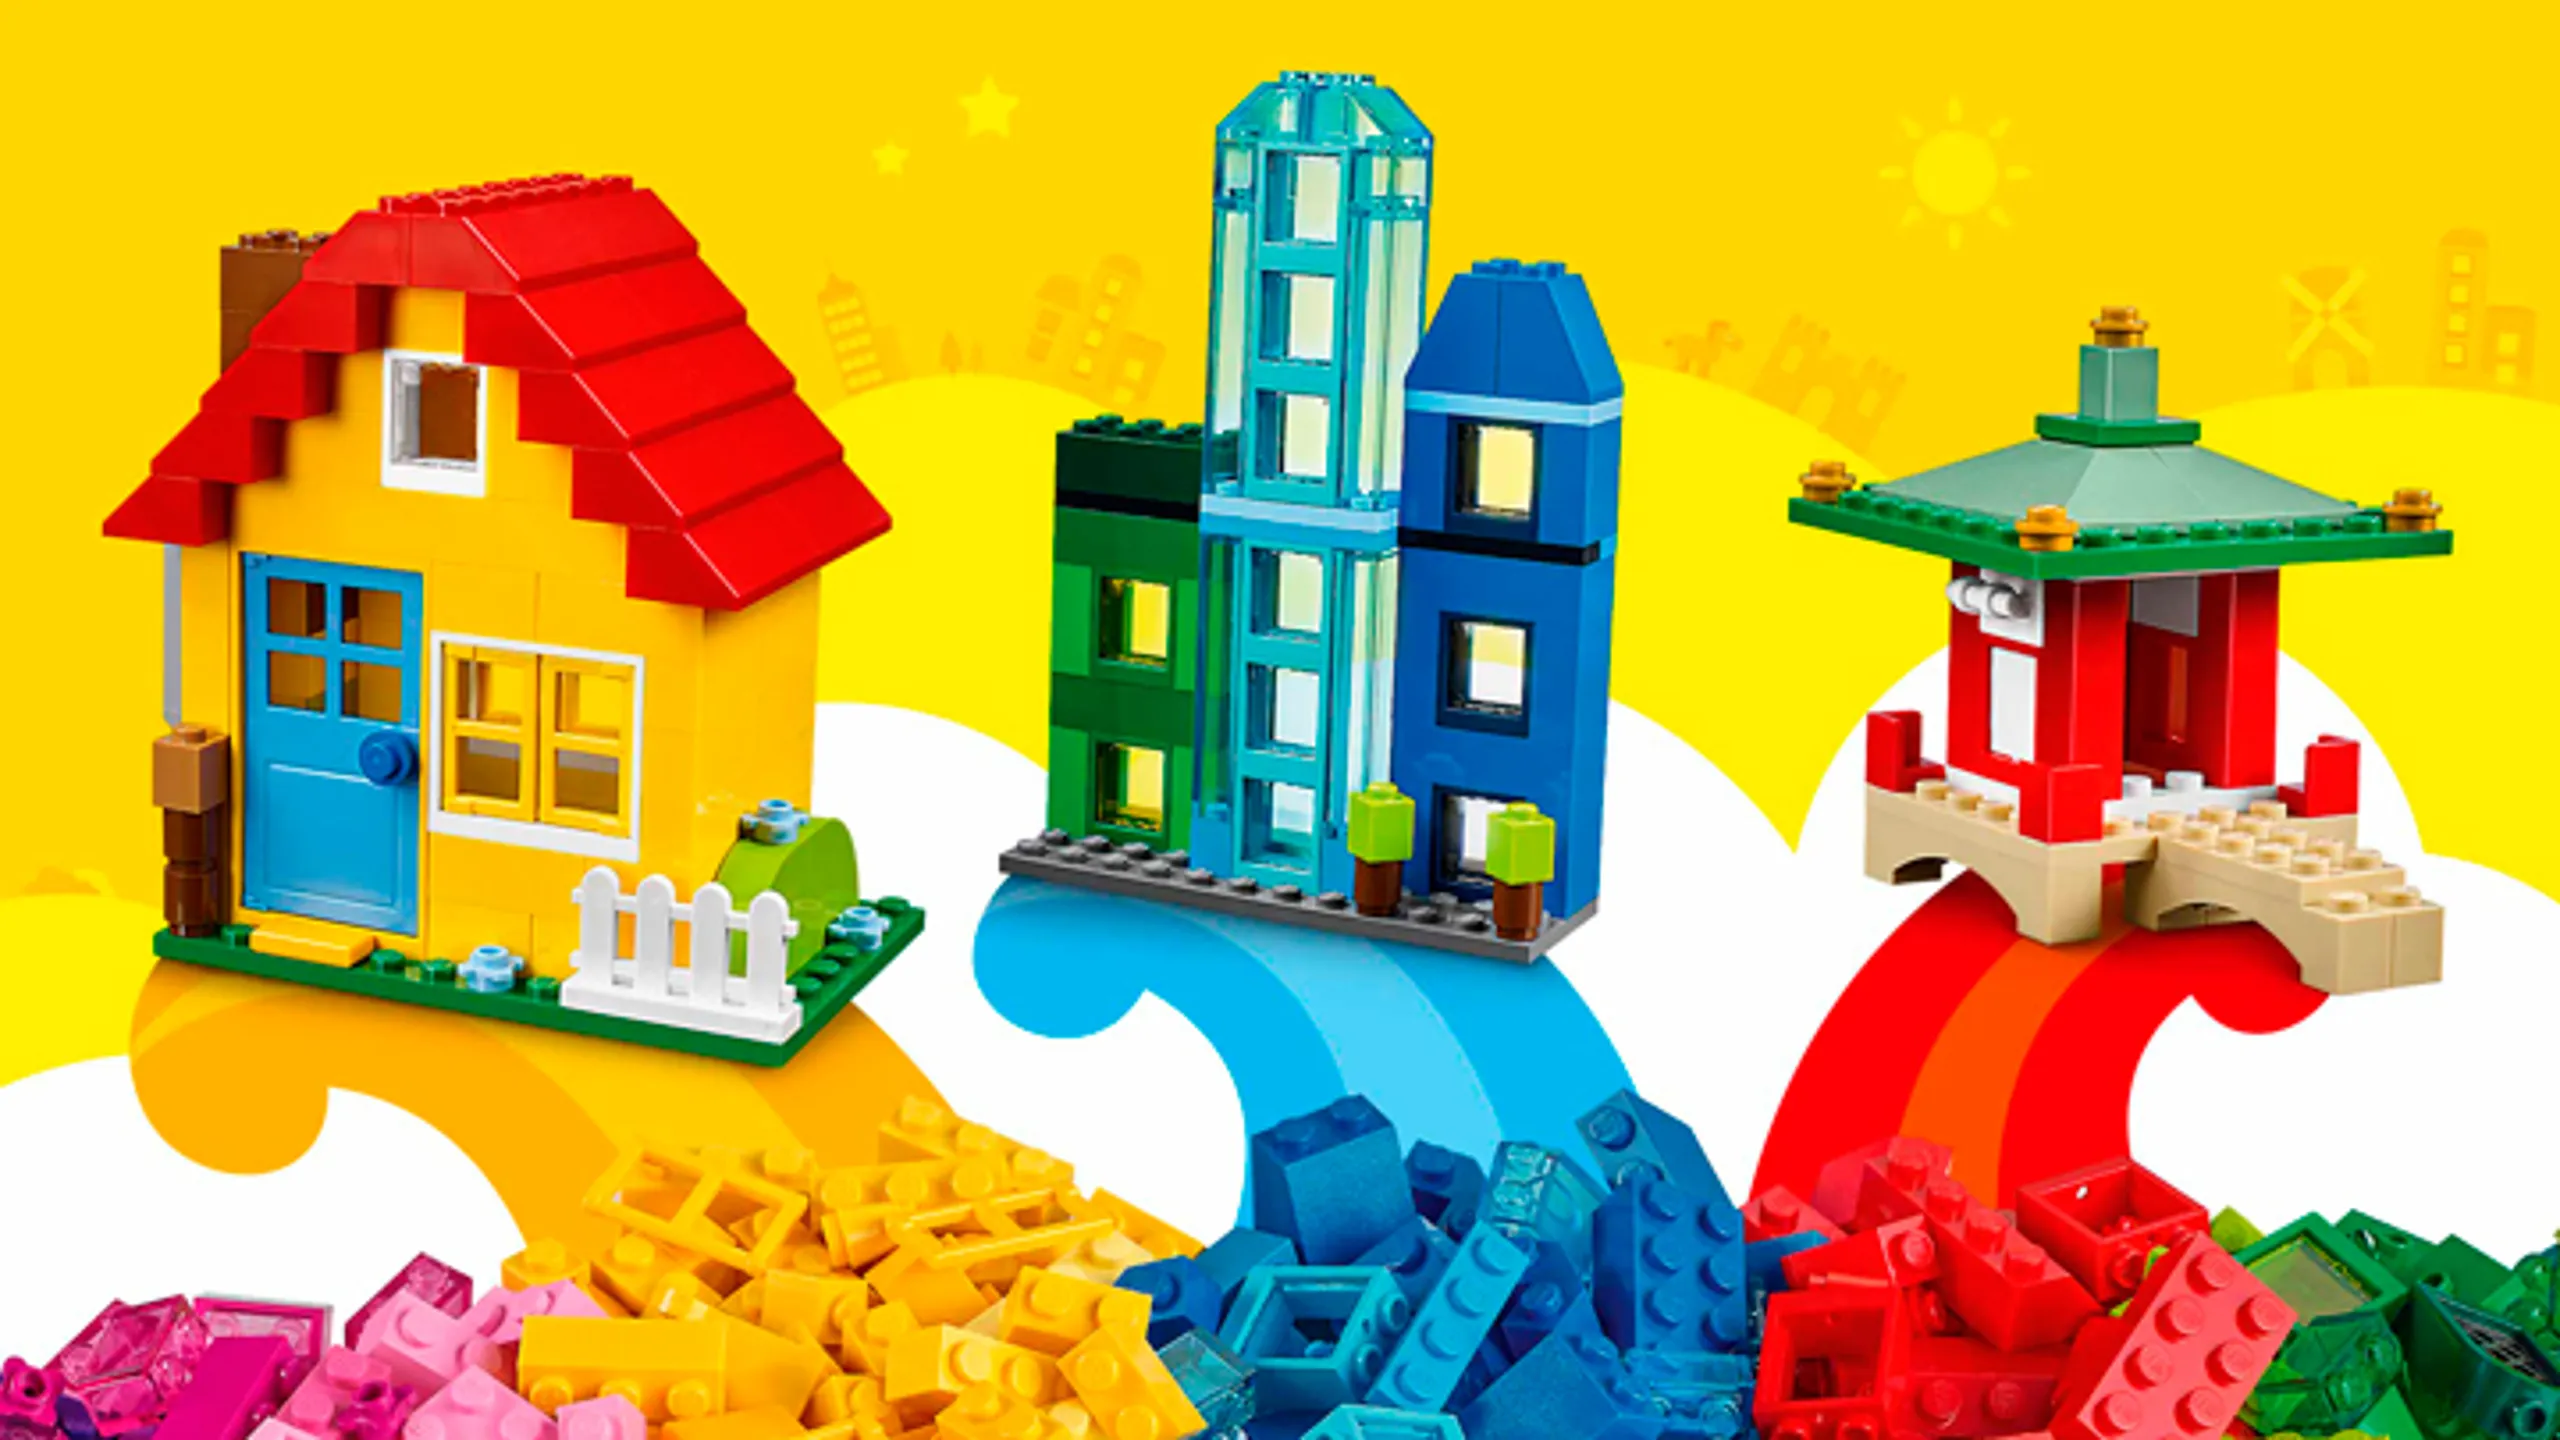 LEGO Classic Creative Builder Box - 10703 - Use a mix of yellow, blue and red bricks to build a house, skyscrapers or a Chinese temple!